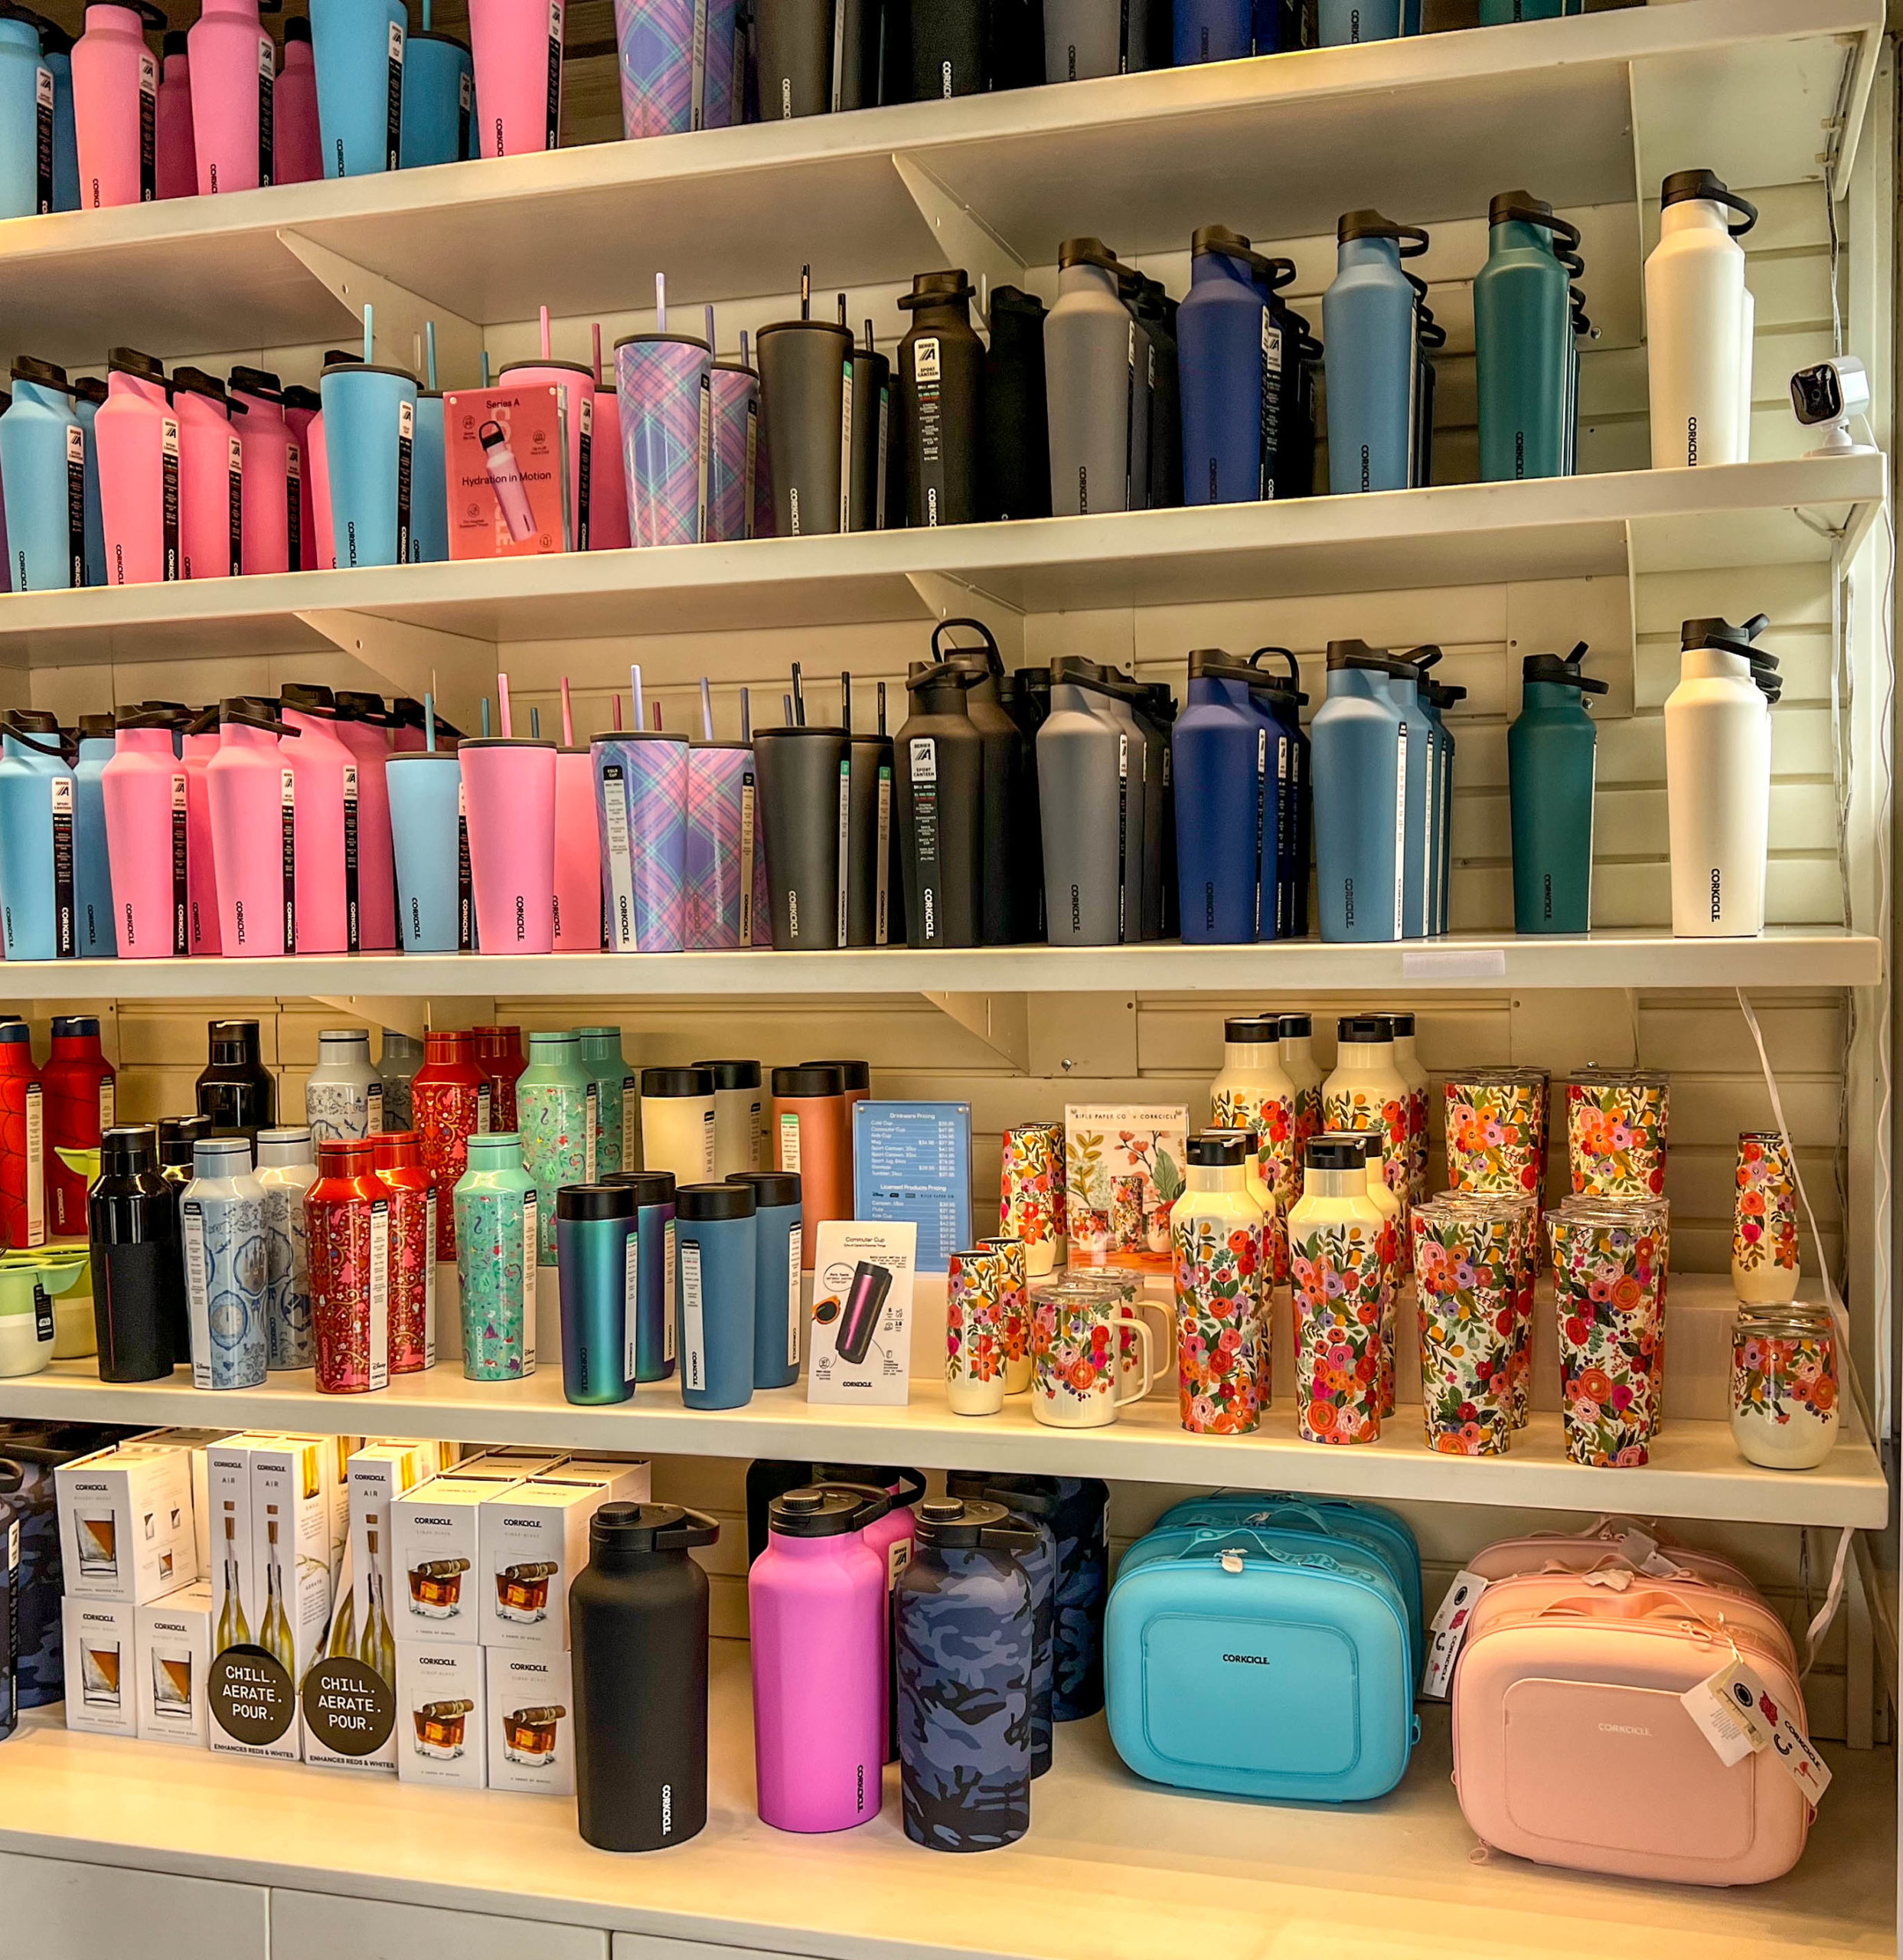 Corkcicle opens its first-ever retail location at Disney Springs